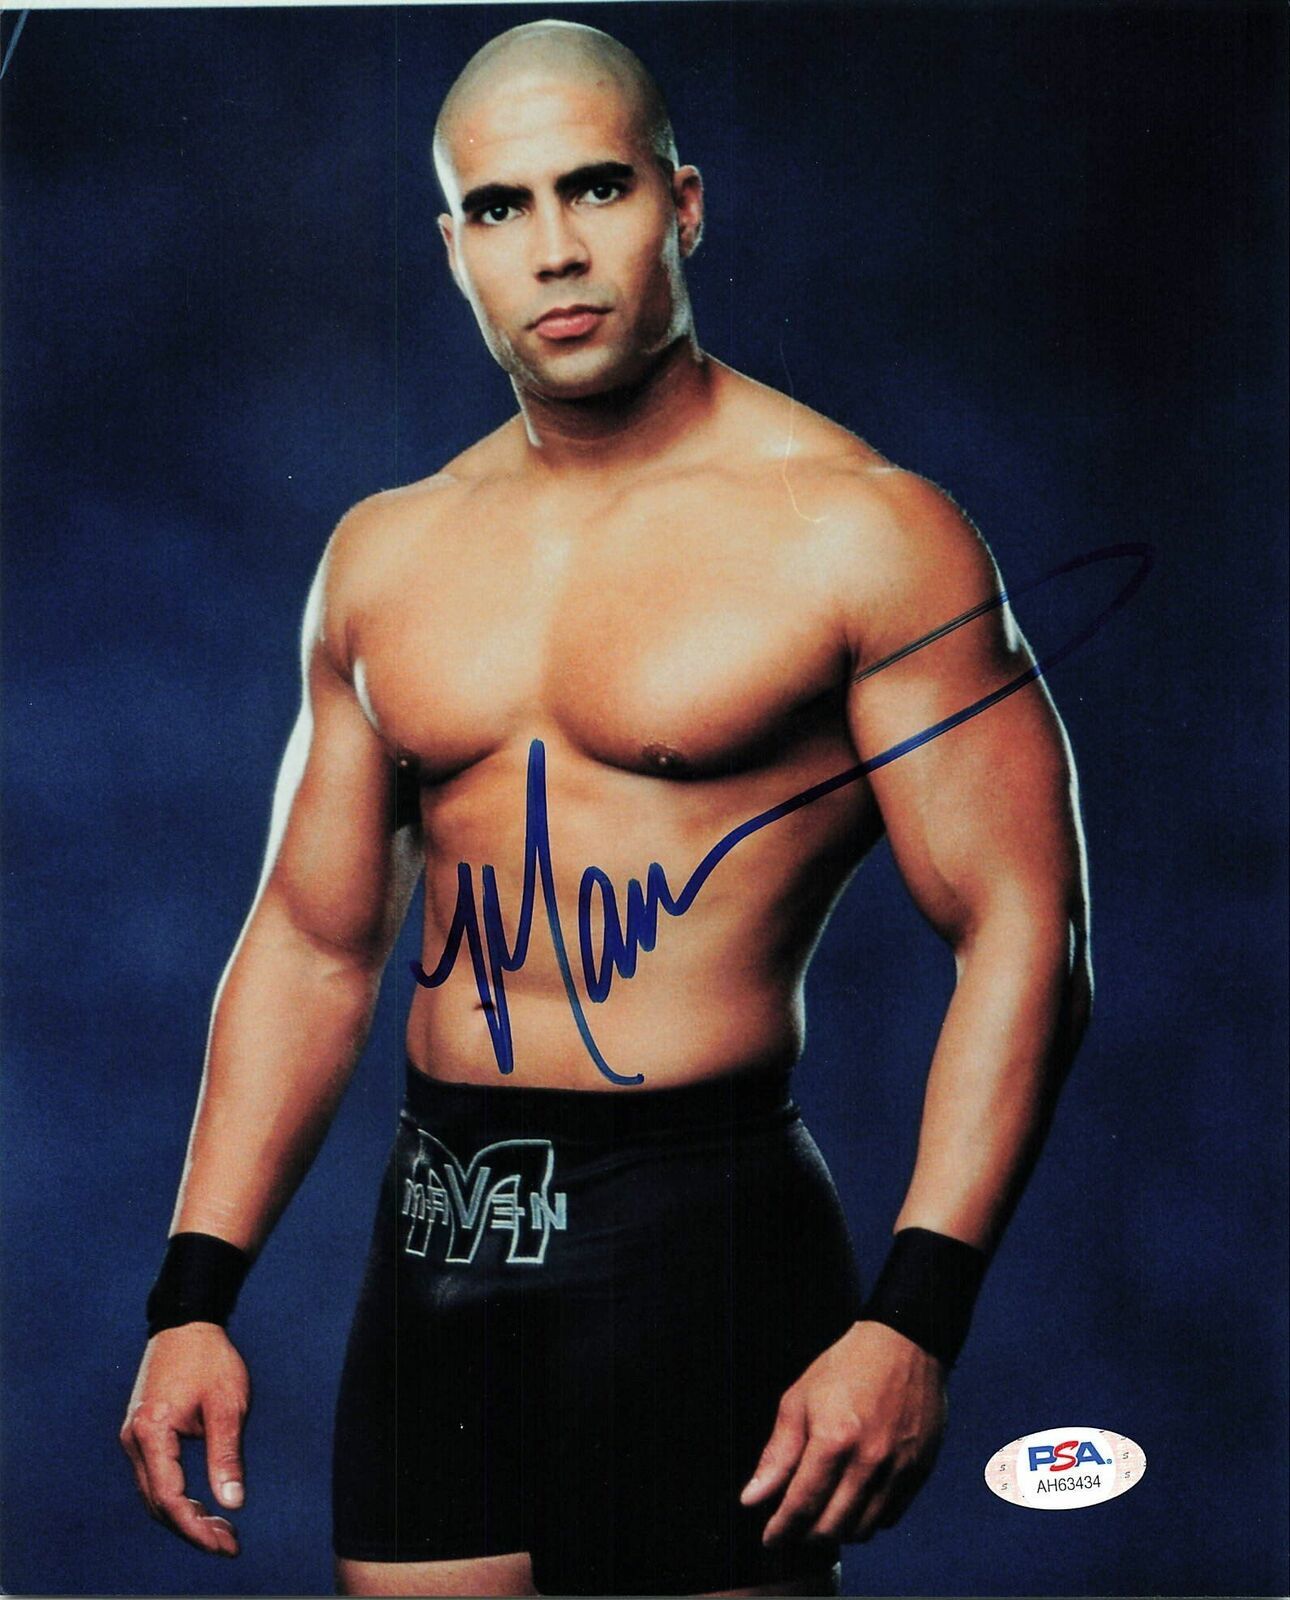 Primary image for Maven Huffman 8x10 photo PSA/DNA COA WWE Autographed Wrestling